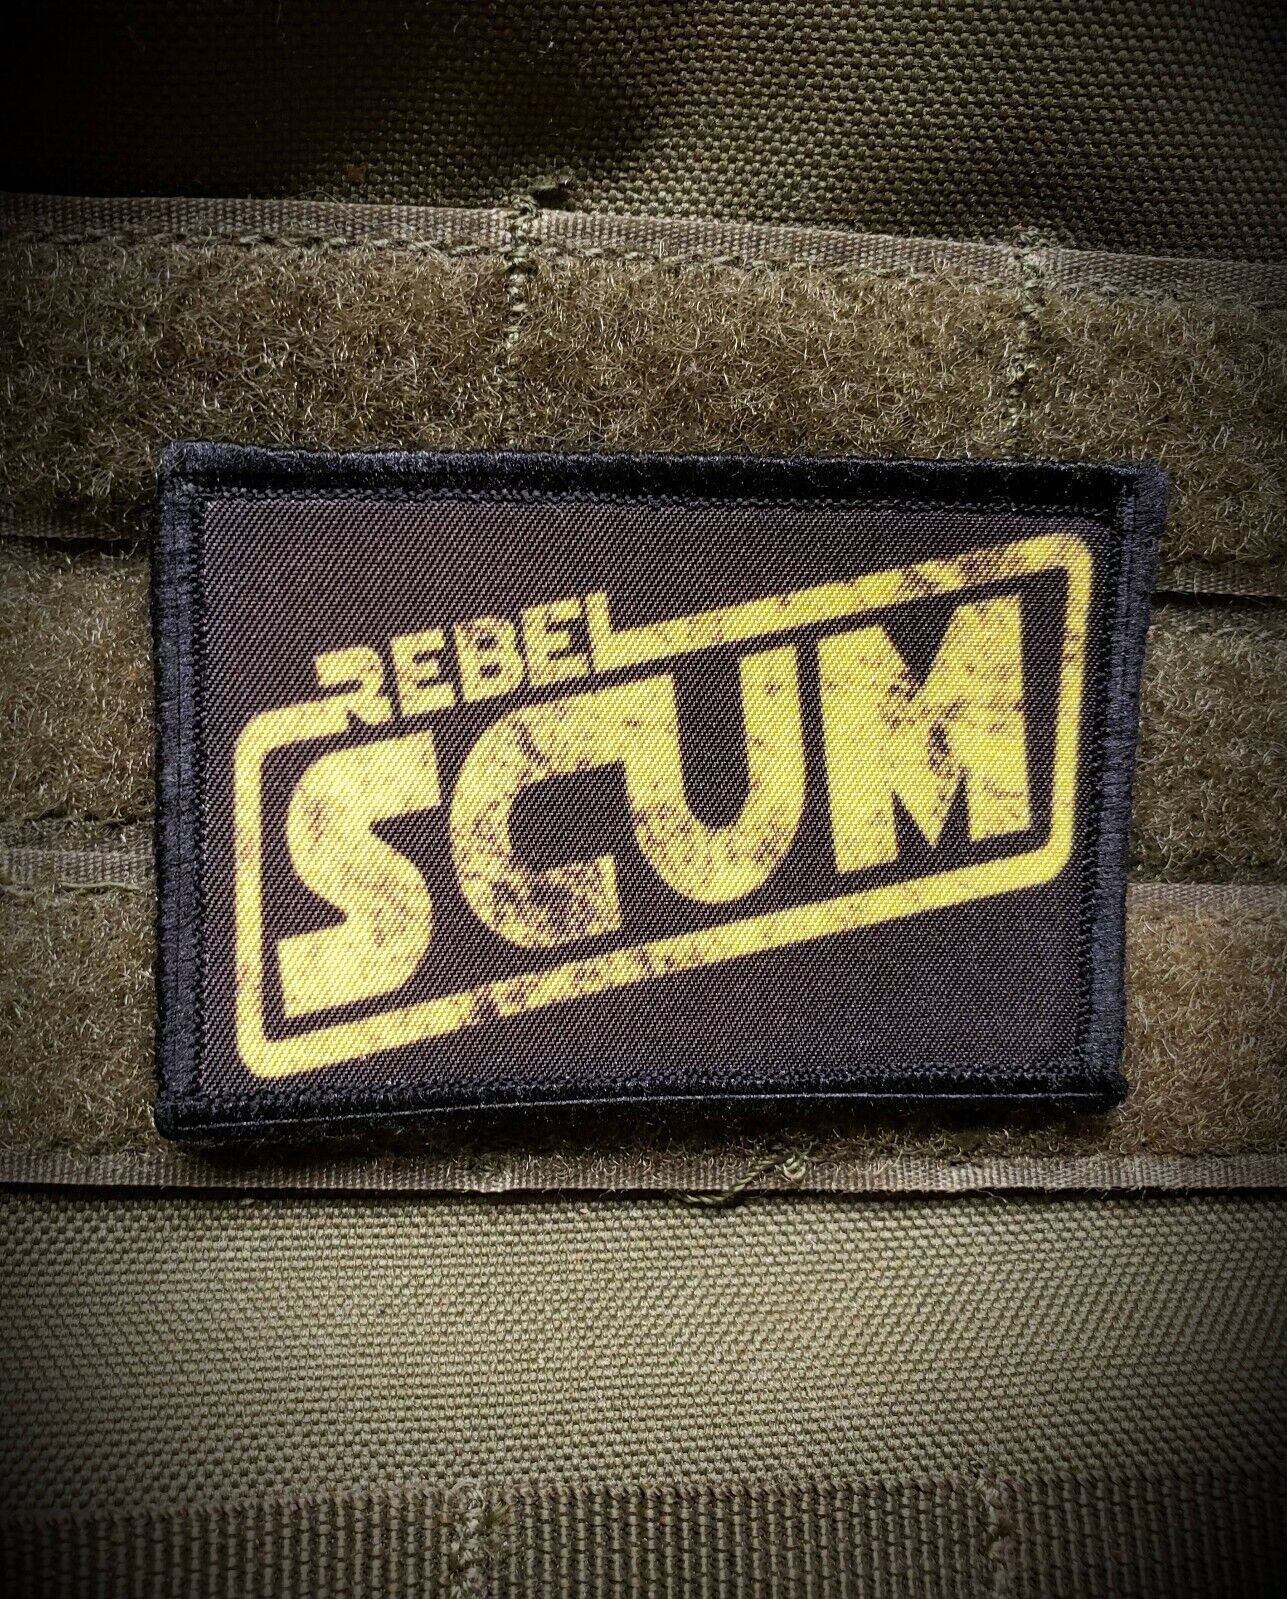 Rebel Scum Morale Patch Tactical ARMY Hook Military USA